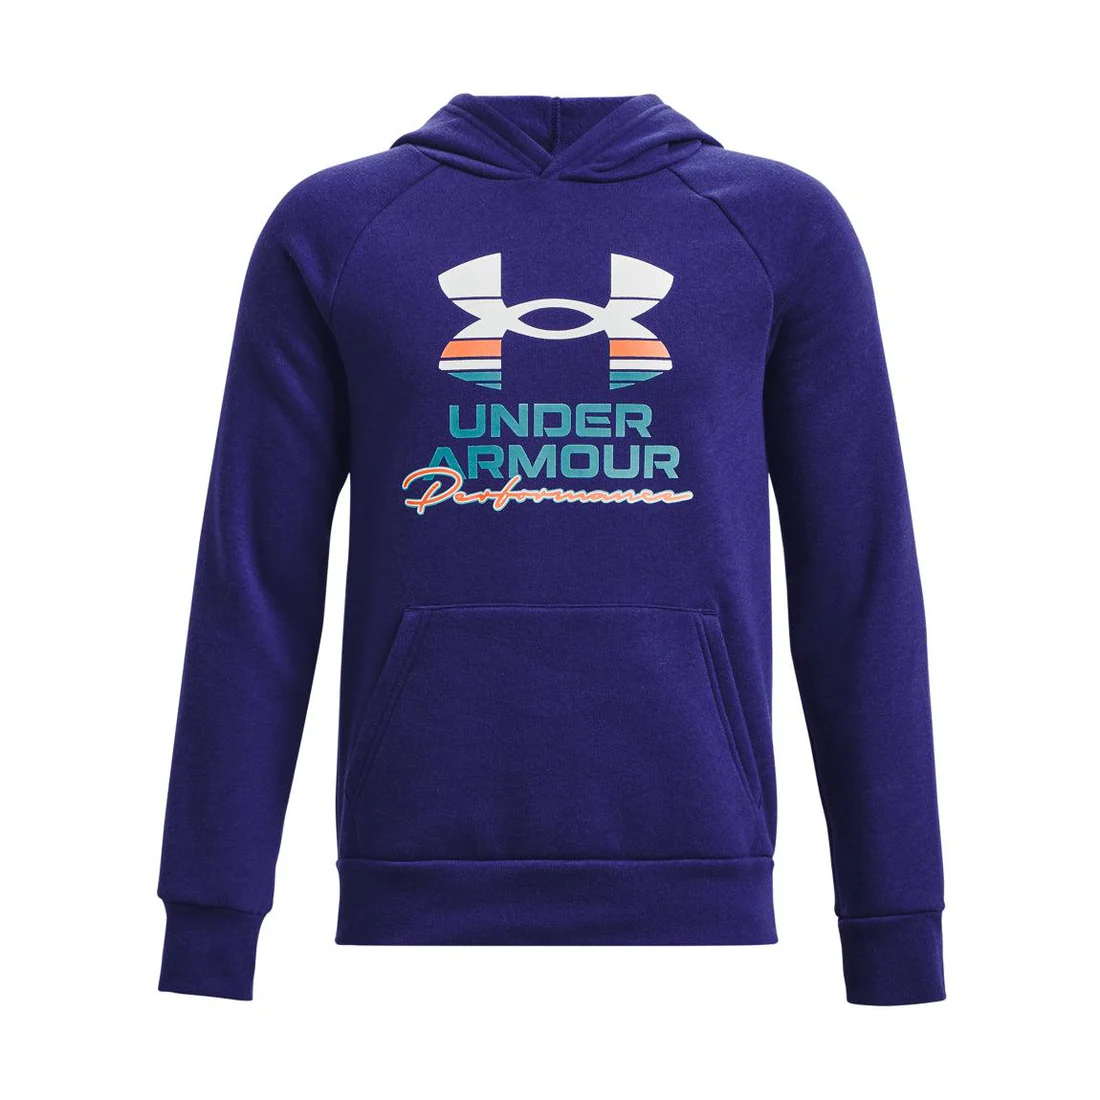 Under Armour Rival Fleece Graphic Hoodie 1378171-468